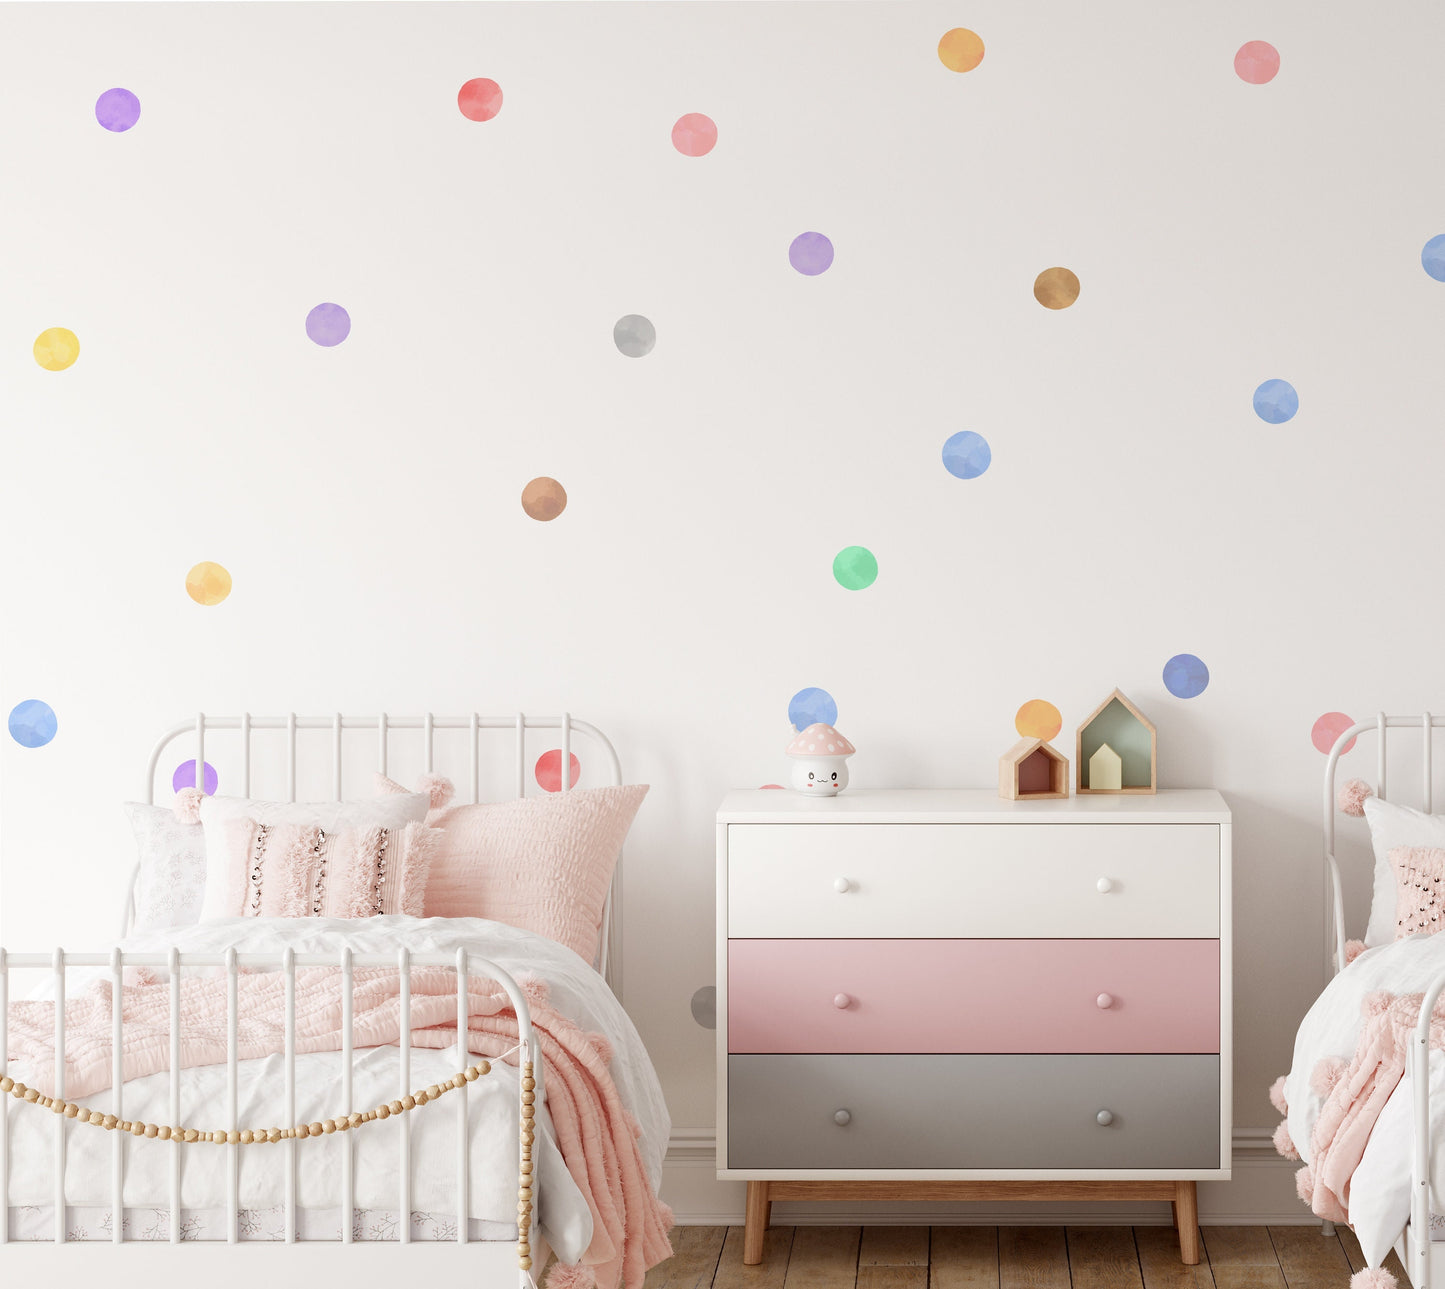 Water Colour Pastel Polka Dot Wall Stickers Decals | Kids Rooms Nursery Playroom Wall Decals | Removable Peel & Stick